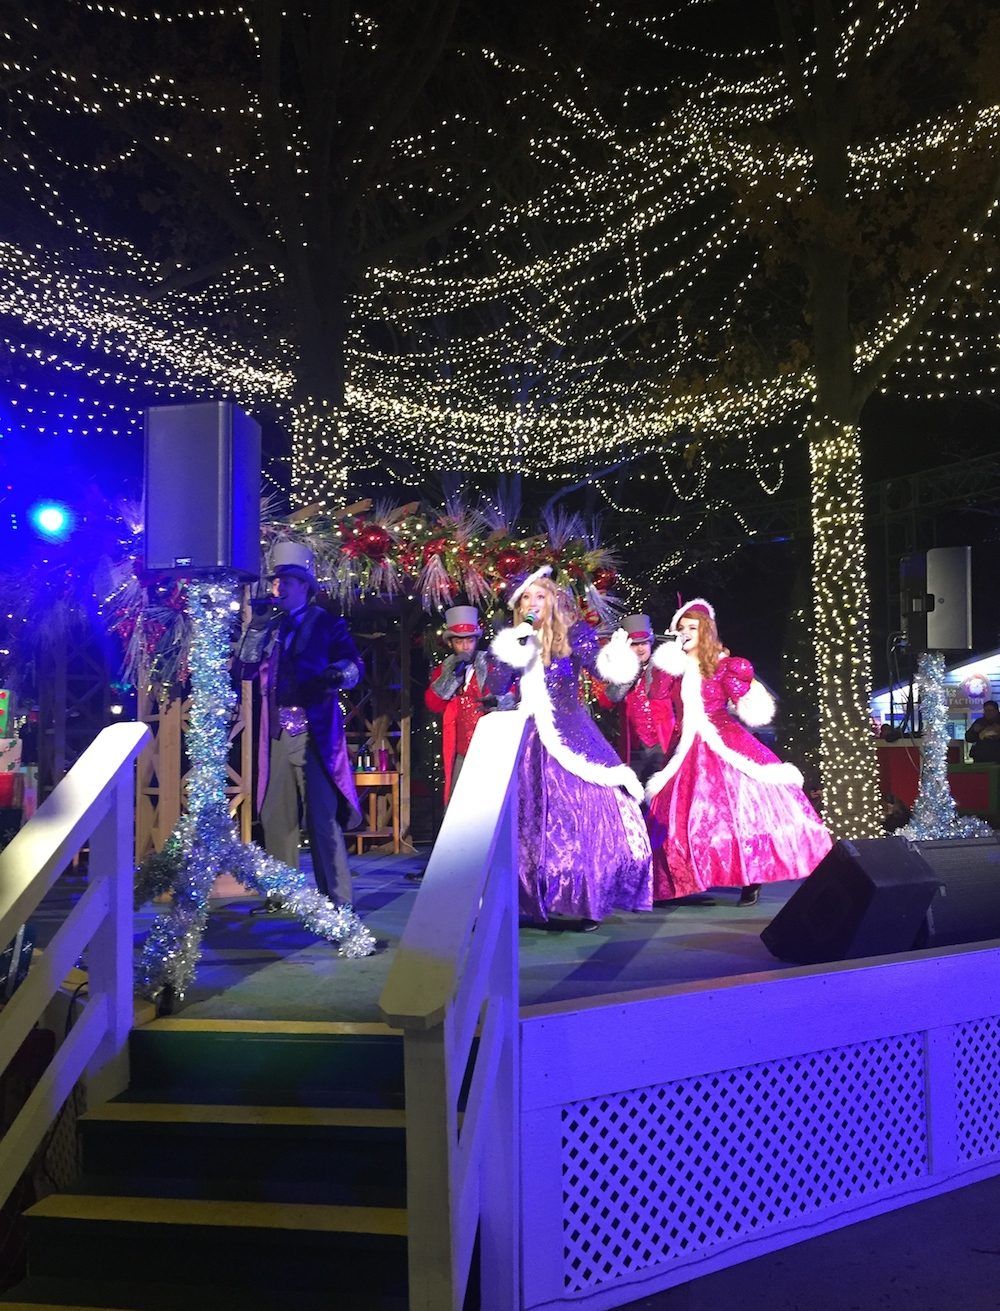 The Jingle Jazz ensemble performing at at Worlds of Fun's WinterFest in Kansas City, Missouri